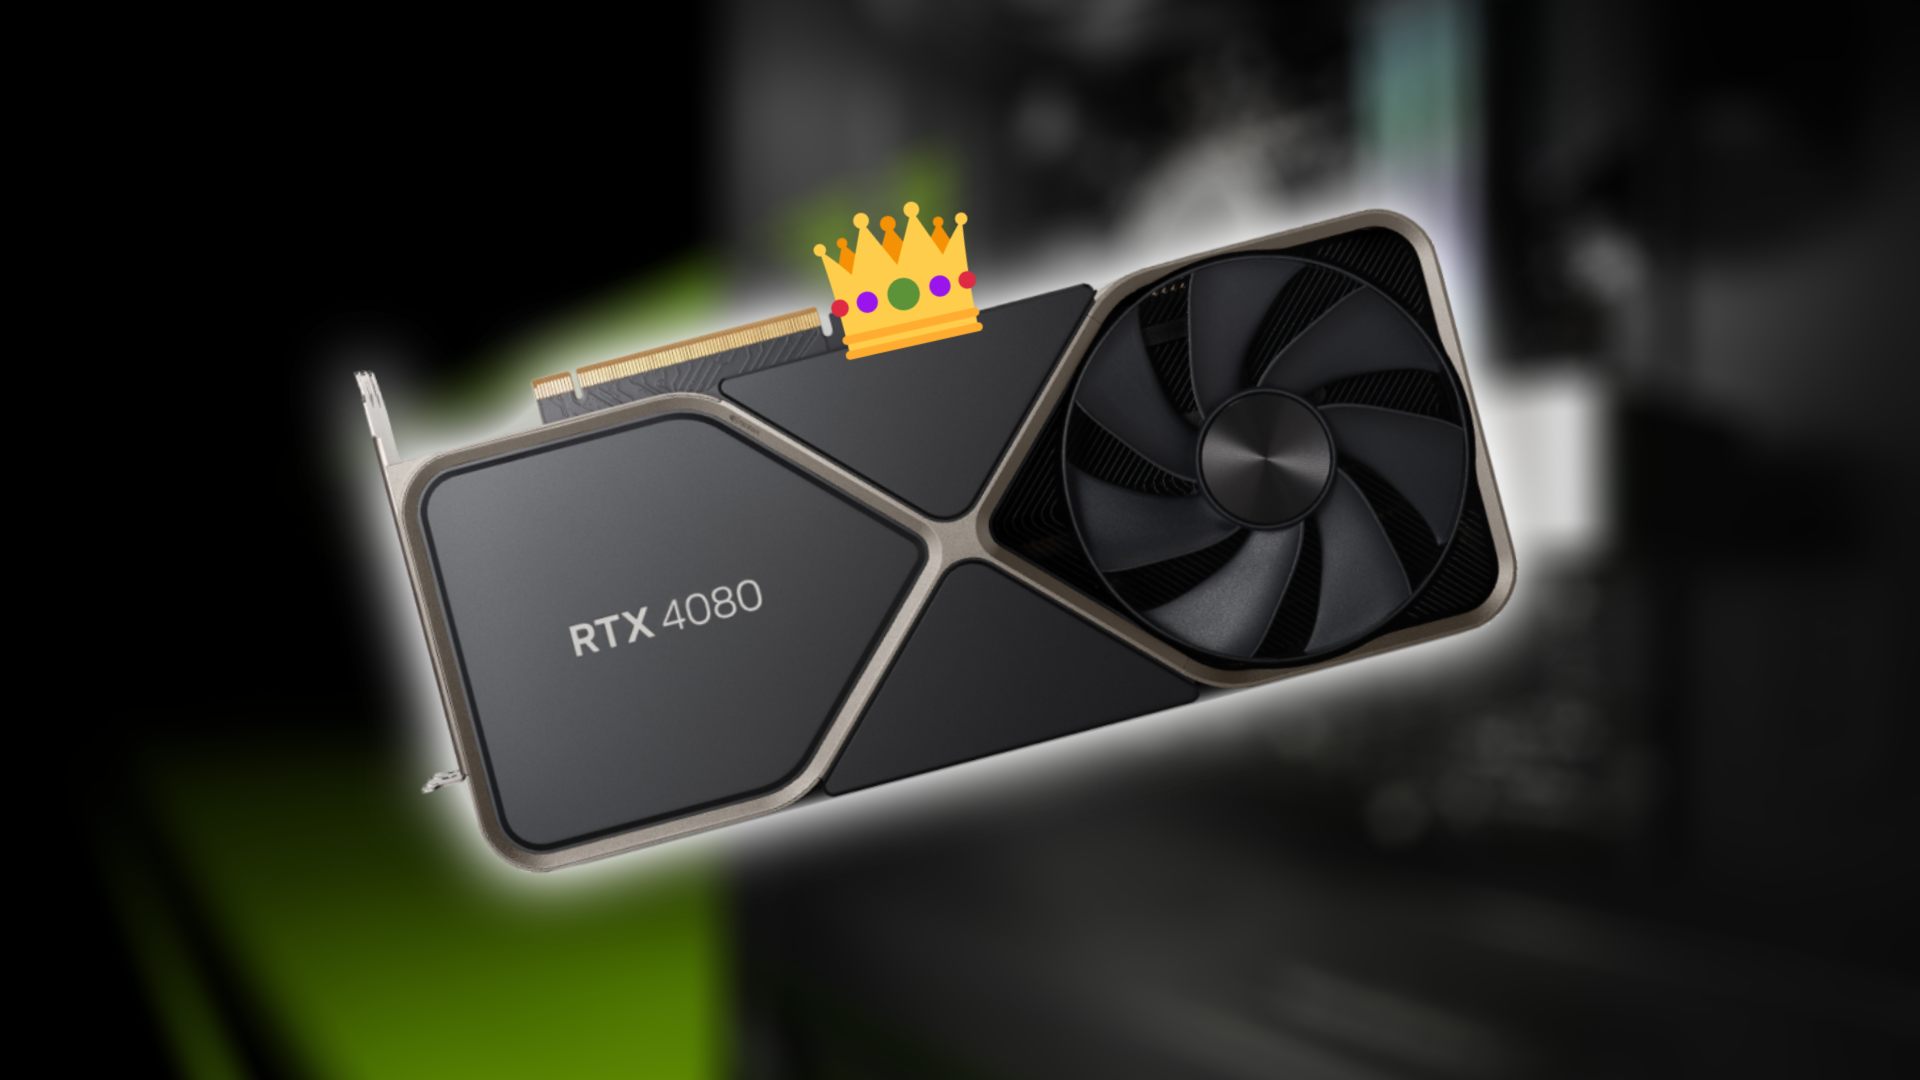 Nvidia RTX 4000 duo wins Steam survey GPU spot, but AMD misses out